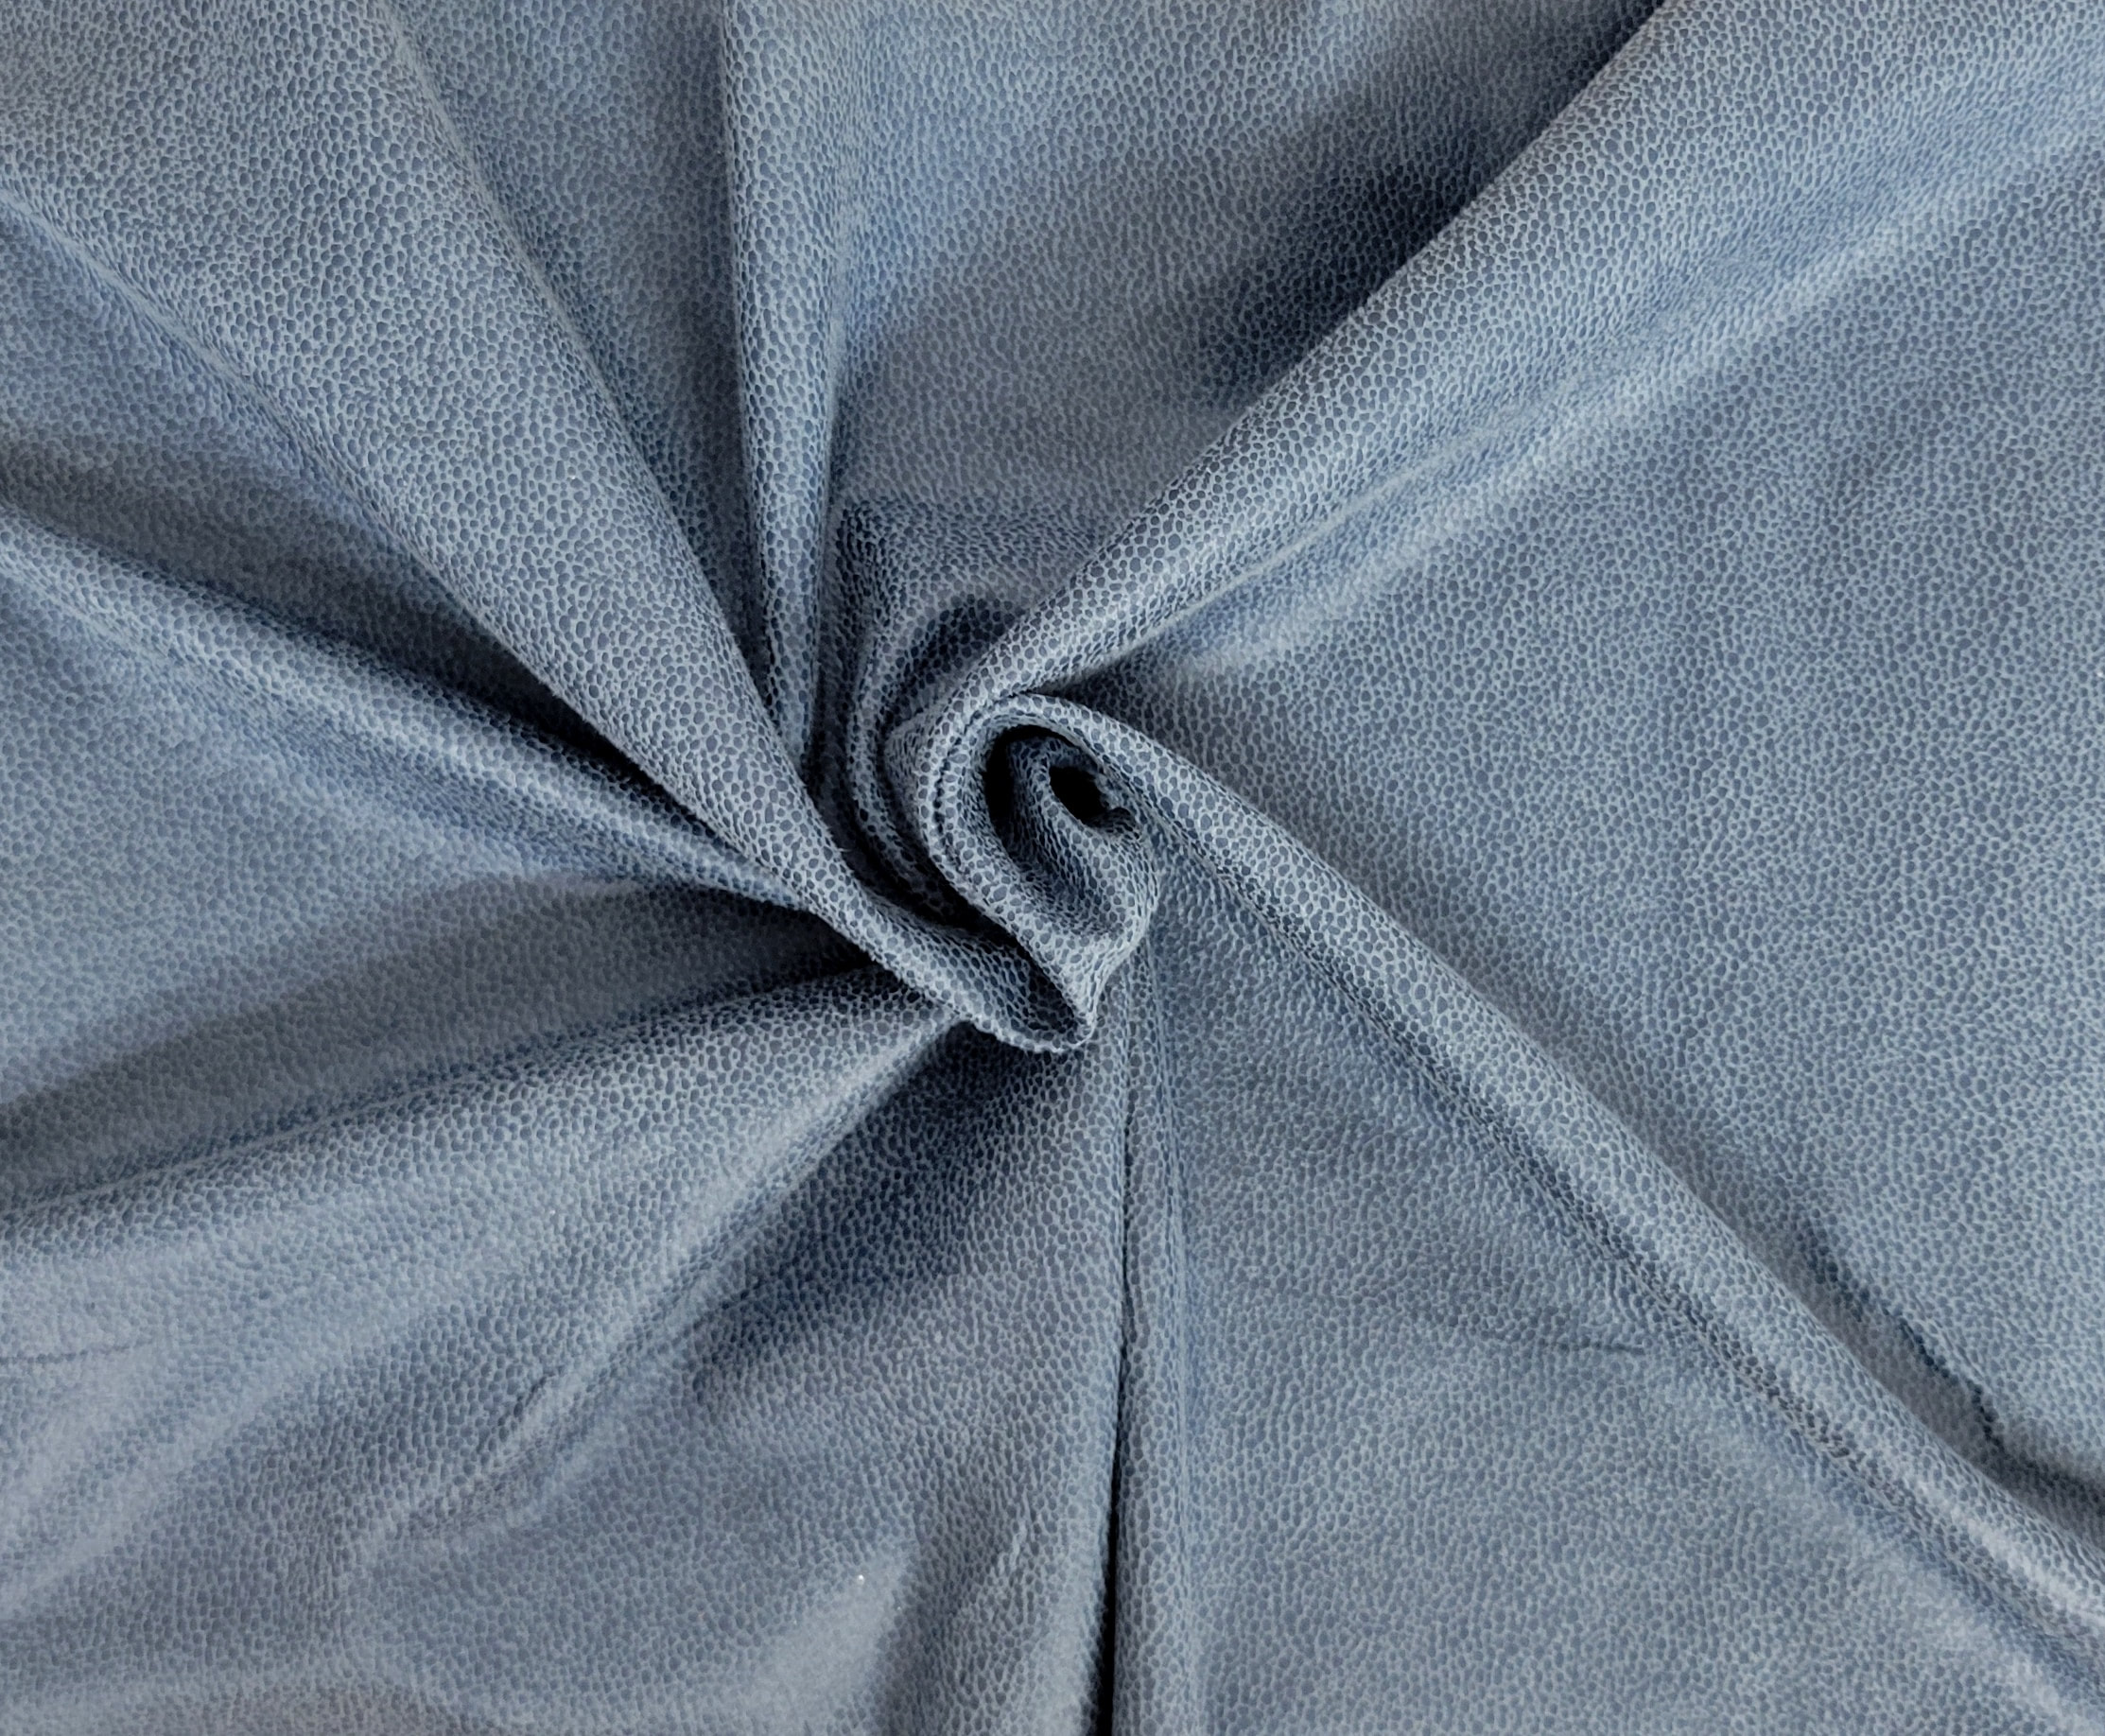 denim blue vegan stretchy faux leather fabric by the yard and wholesale ...